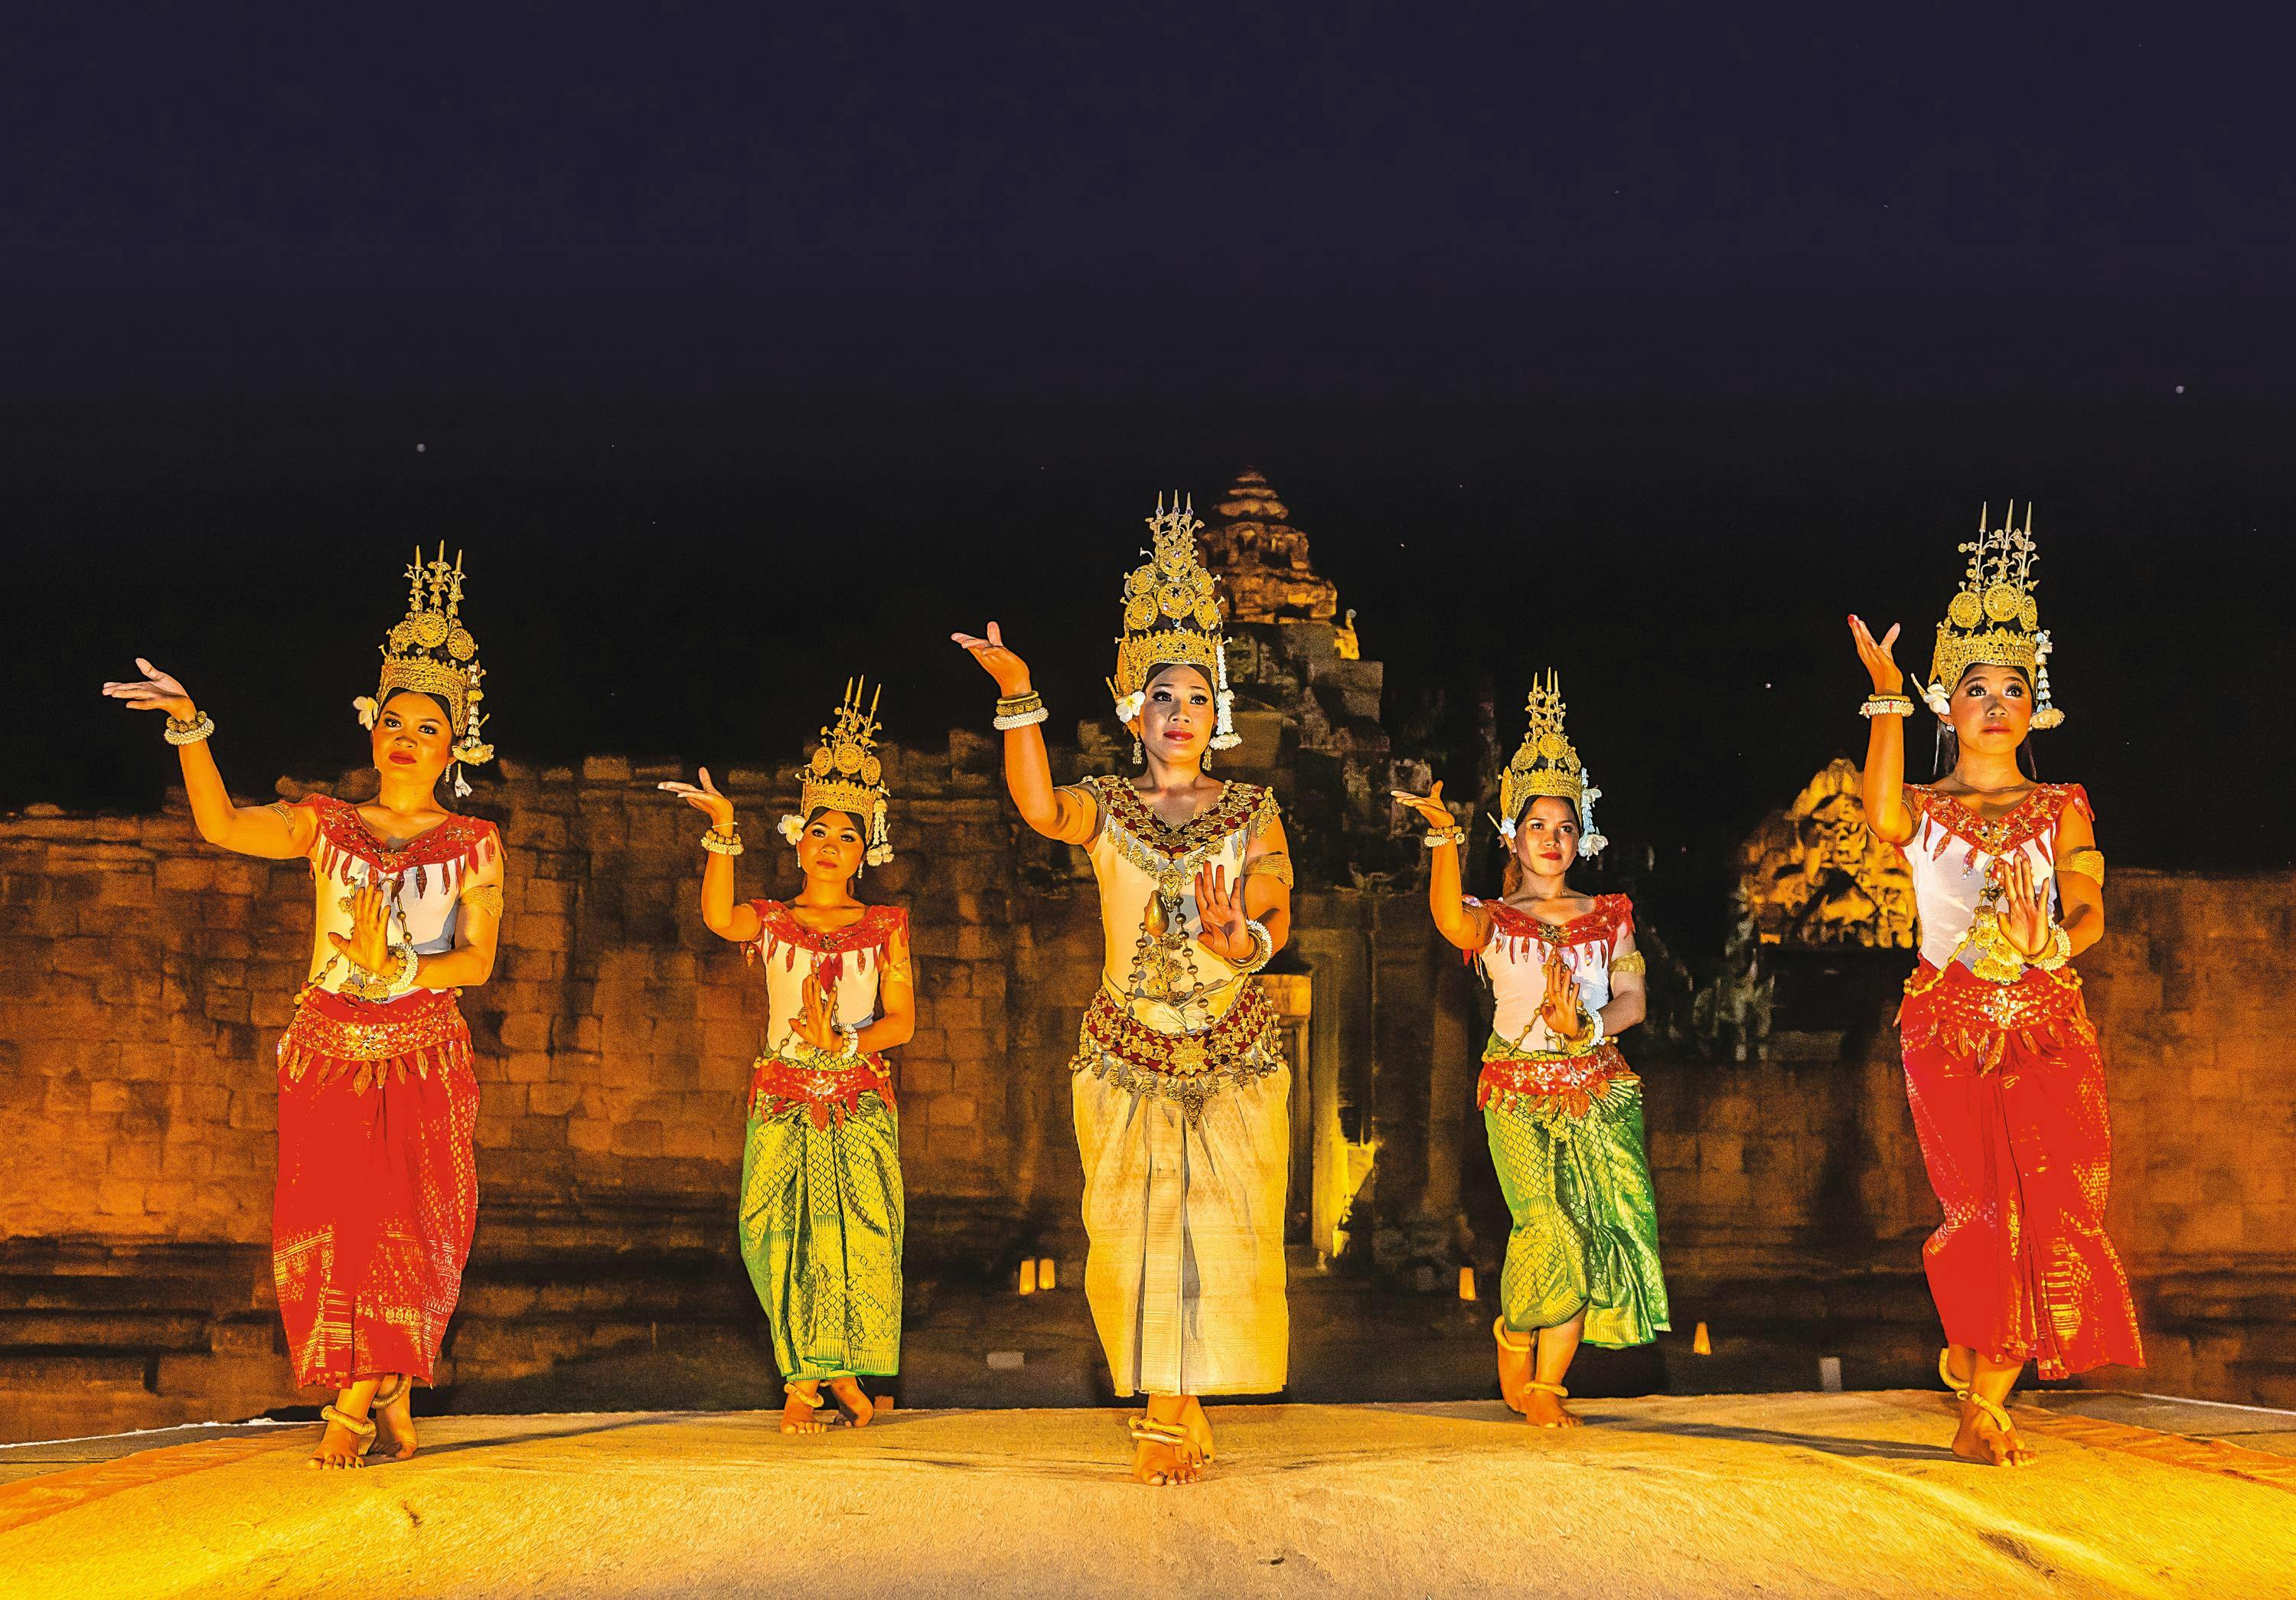 An evening performance of traditional Apsara Dance  at Banteay Srei Temple, Angkor, Siem Reap Province, Cambodia